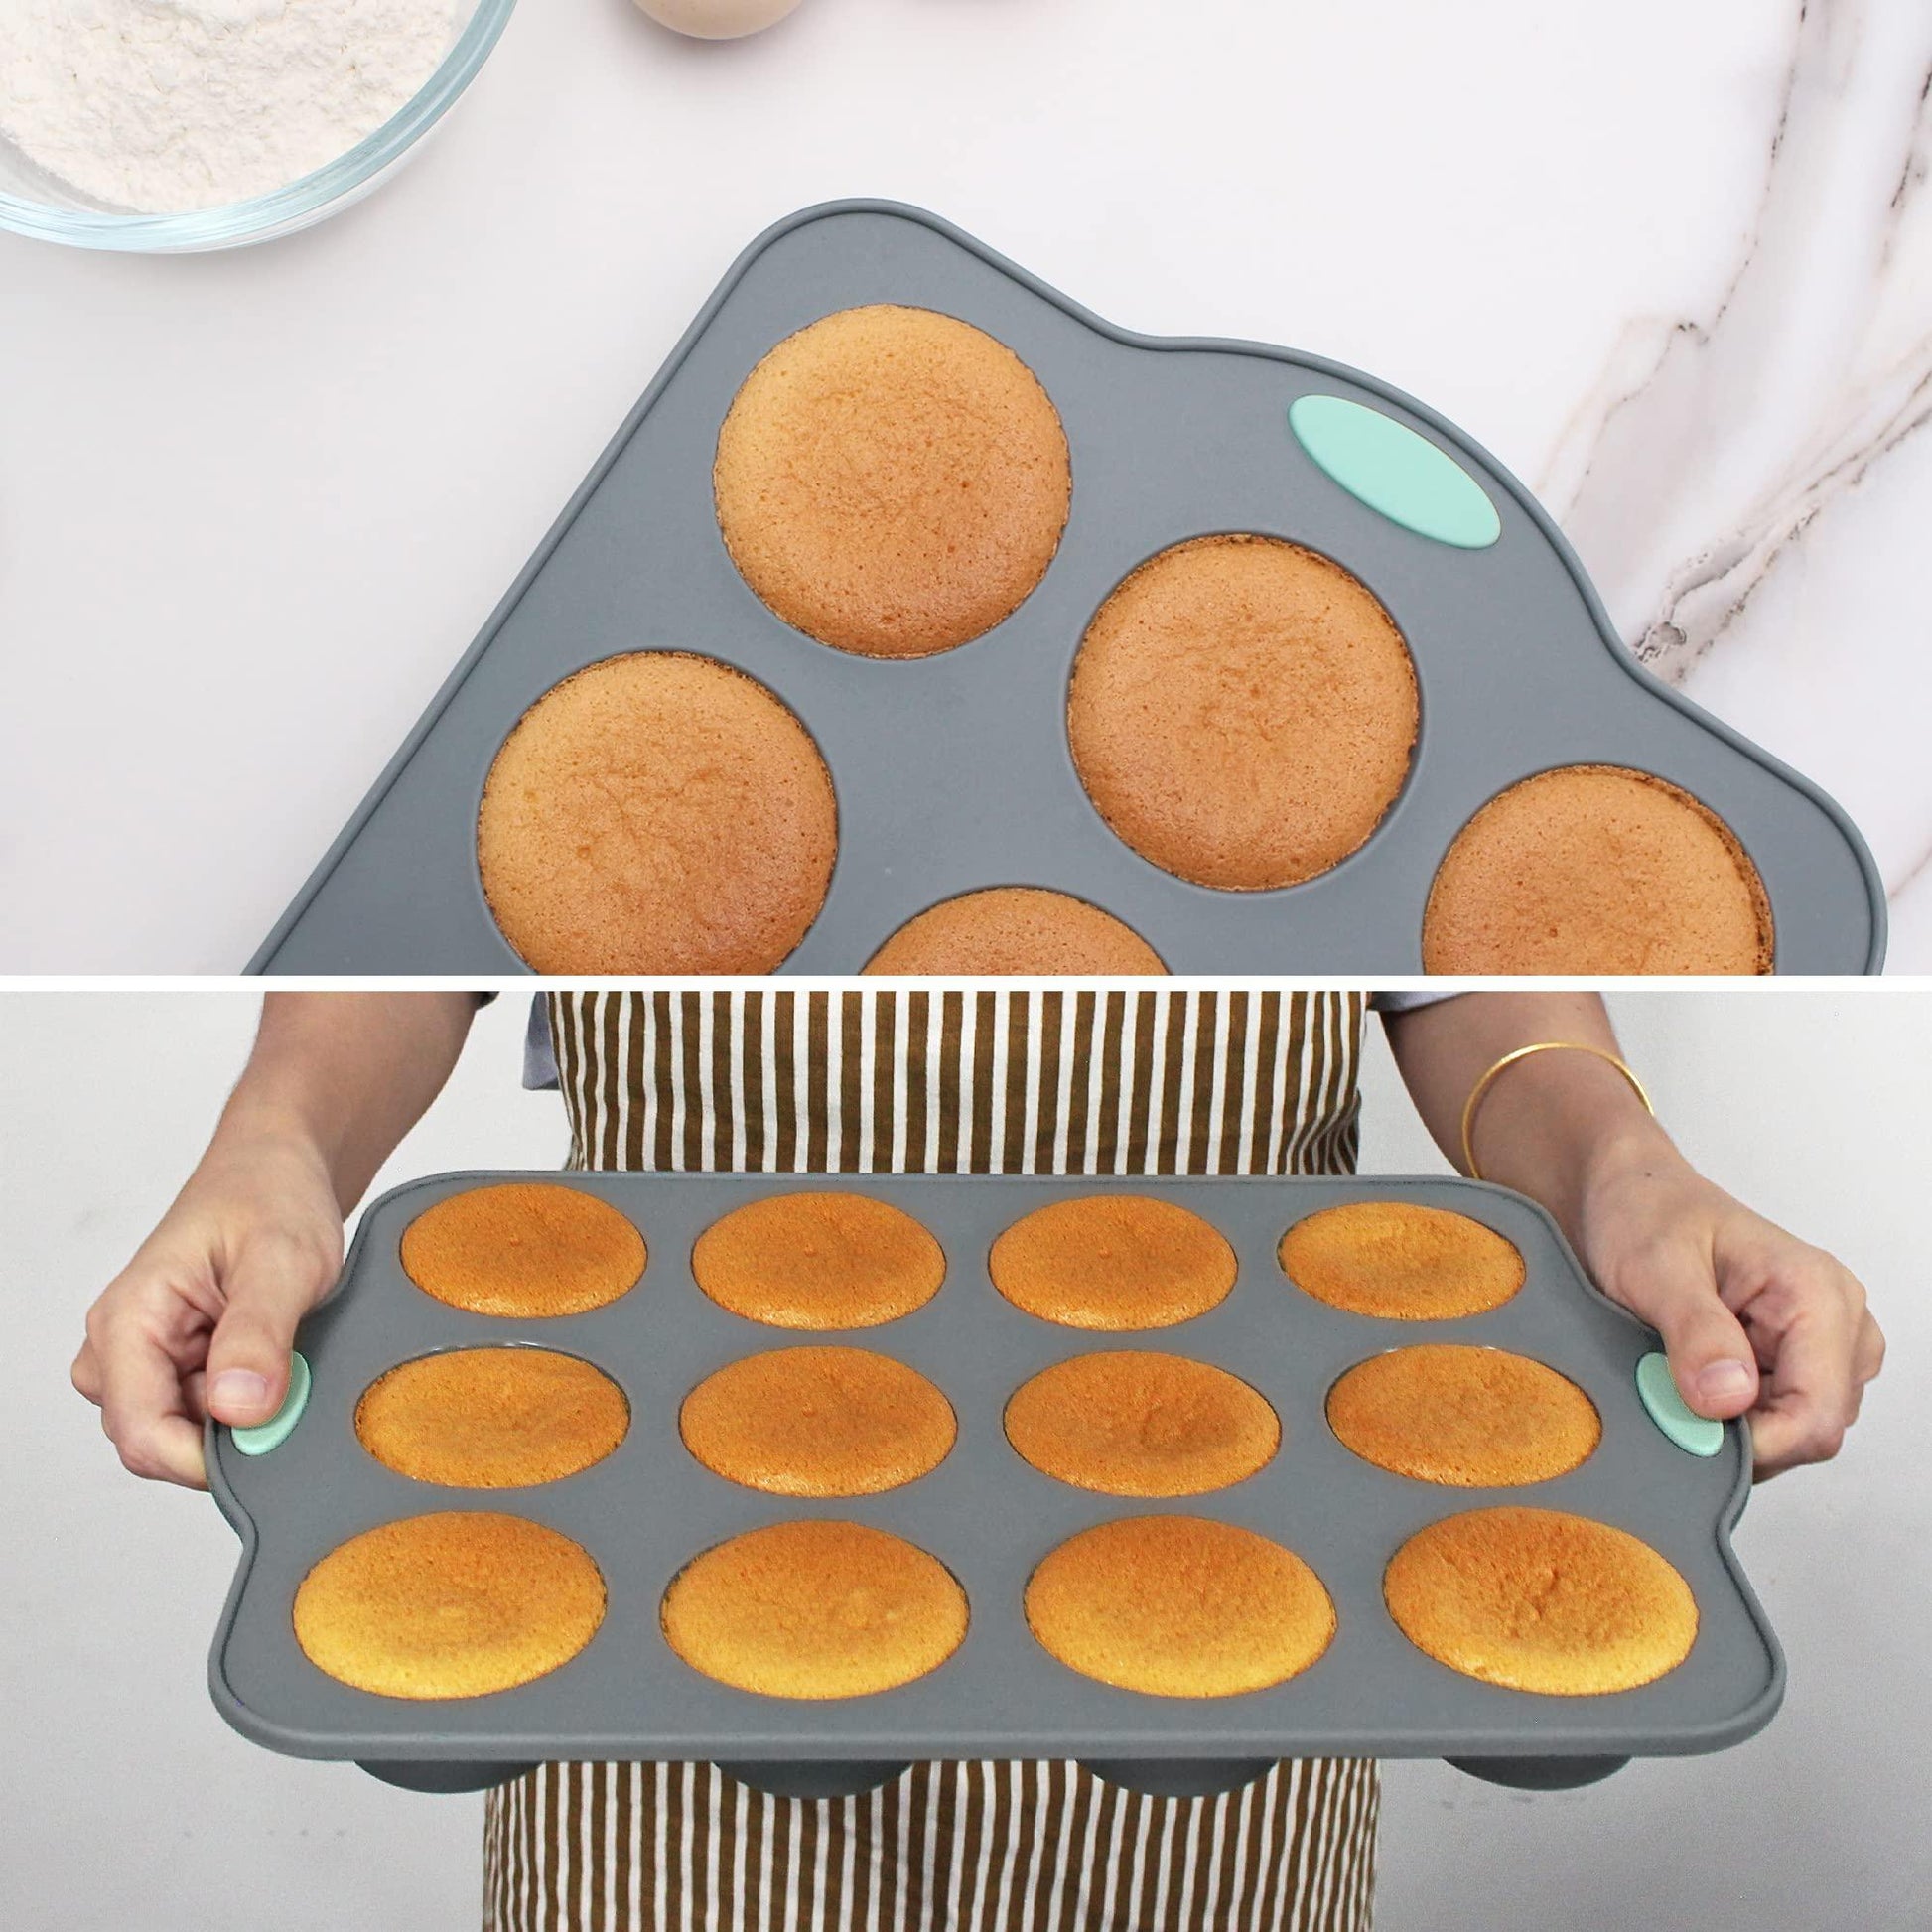 To encounter Silicone Muffin Pan, 2 Pack 12-Cup, Nonstick Baking Cups, BPA Free Cupcake Pan with Metal Reinforced Frame More Strength - CookCave